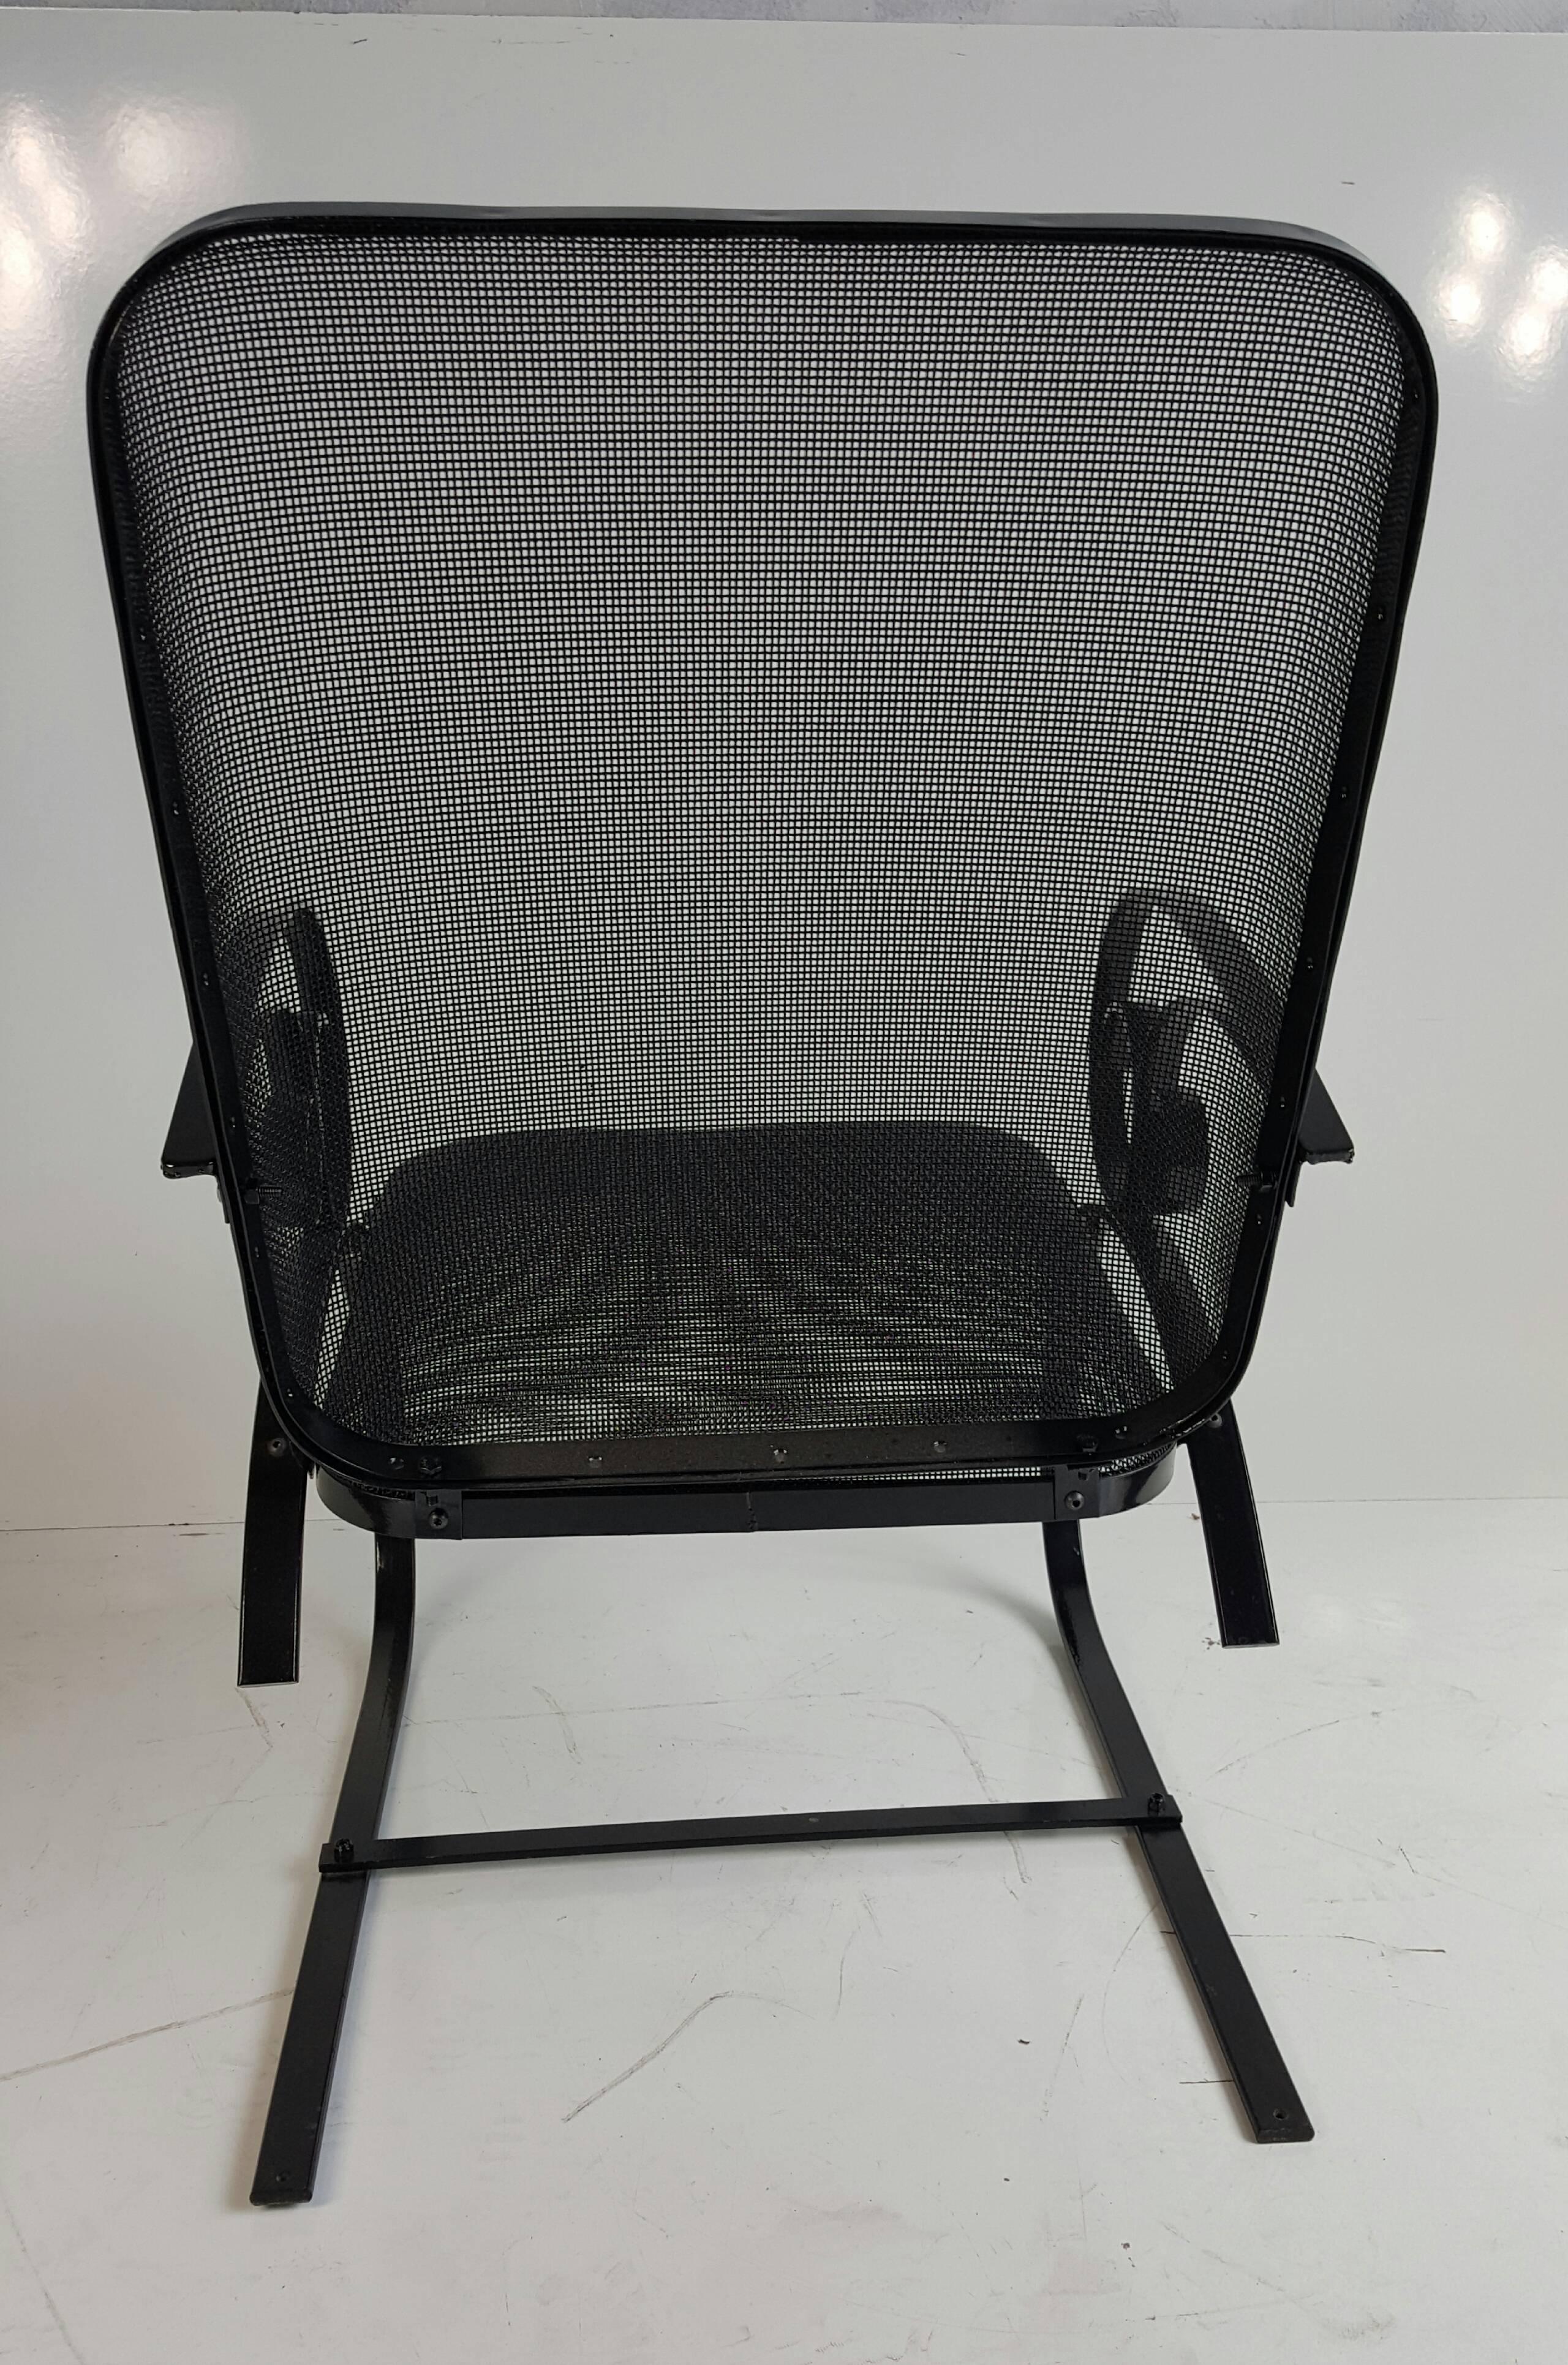 American Art Deco Mesh and Flat Steel Springer Chair, Garden In Excellent Condition For Sale In Buffalo, NY